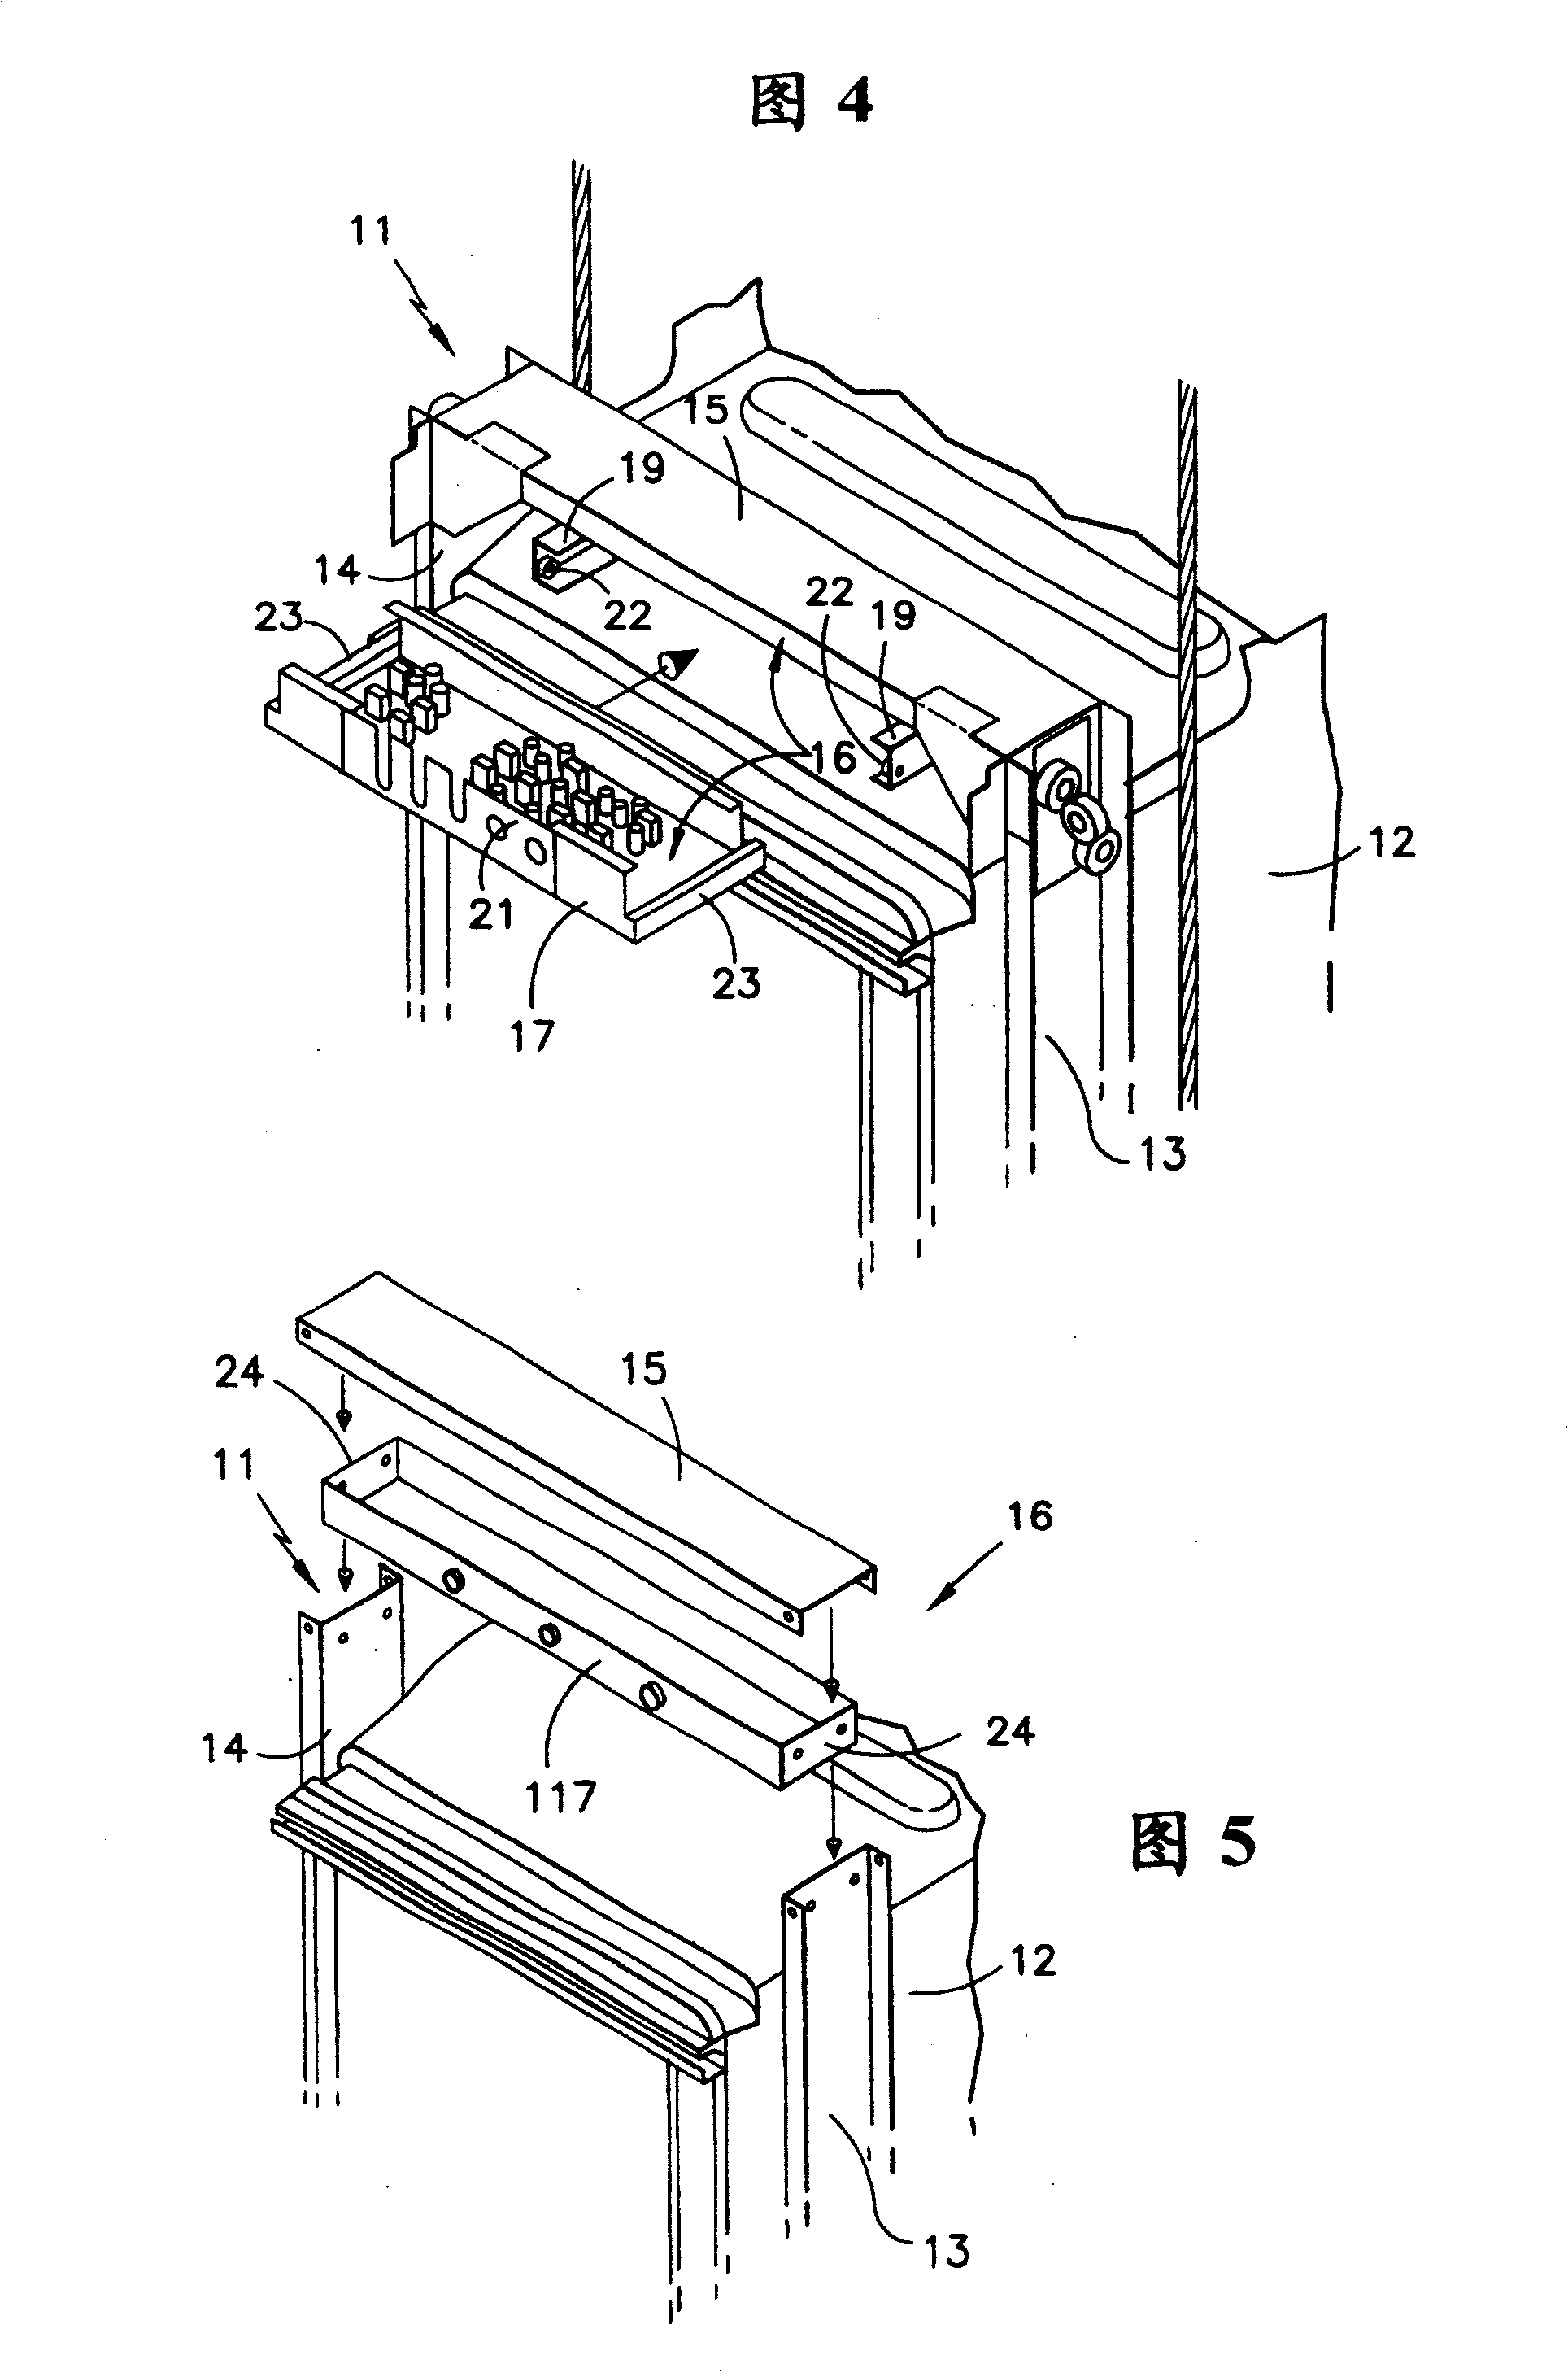 Lift cage frame with integrated controller